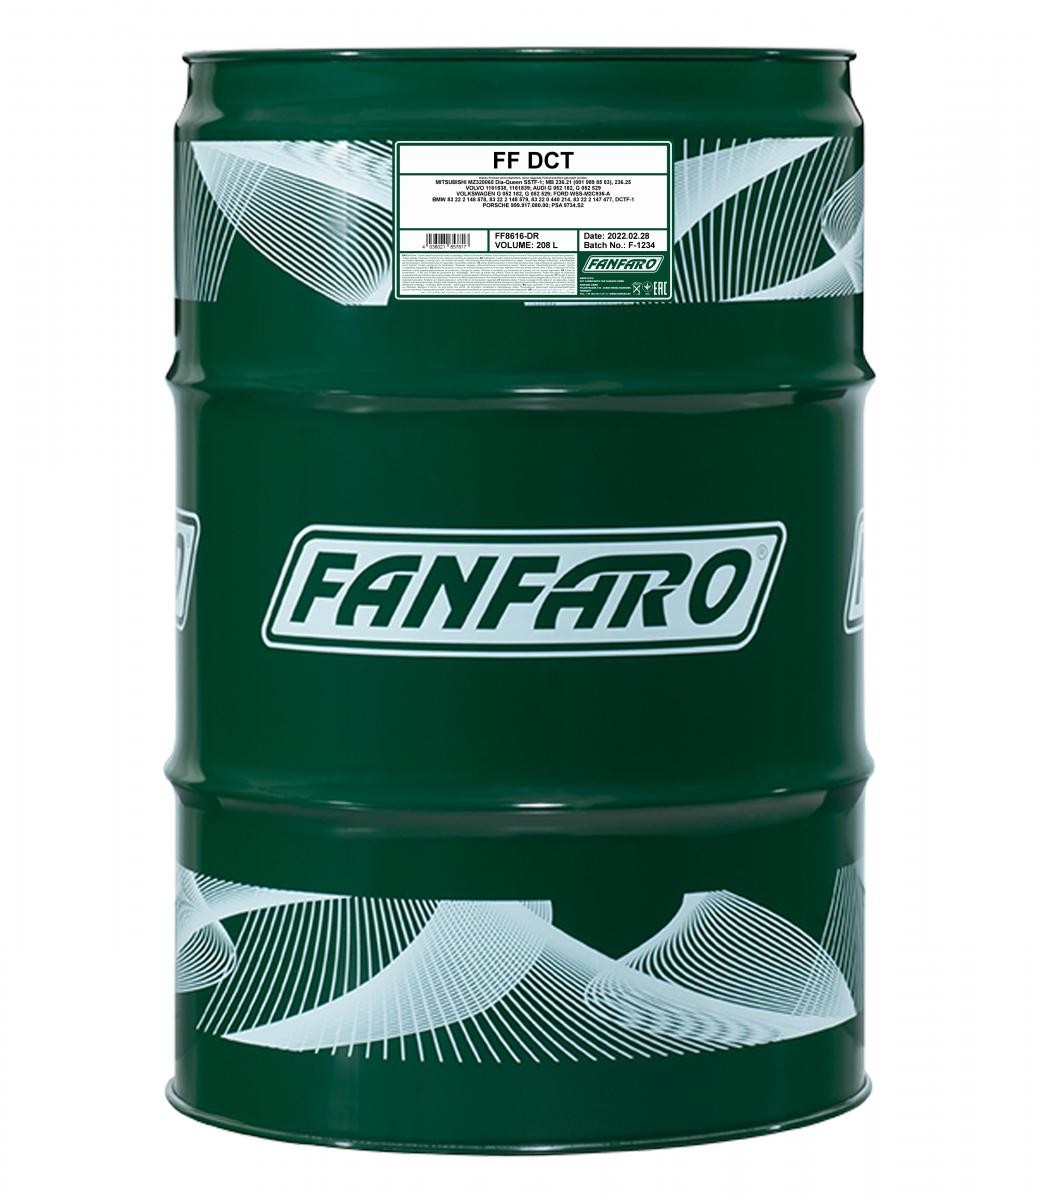 FANFARO FF8616-DR Manual Transmission Oil SEAT experience and price